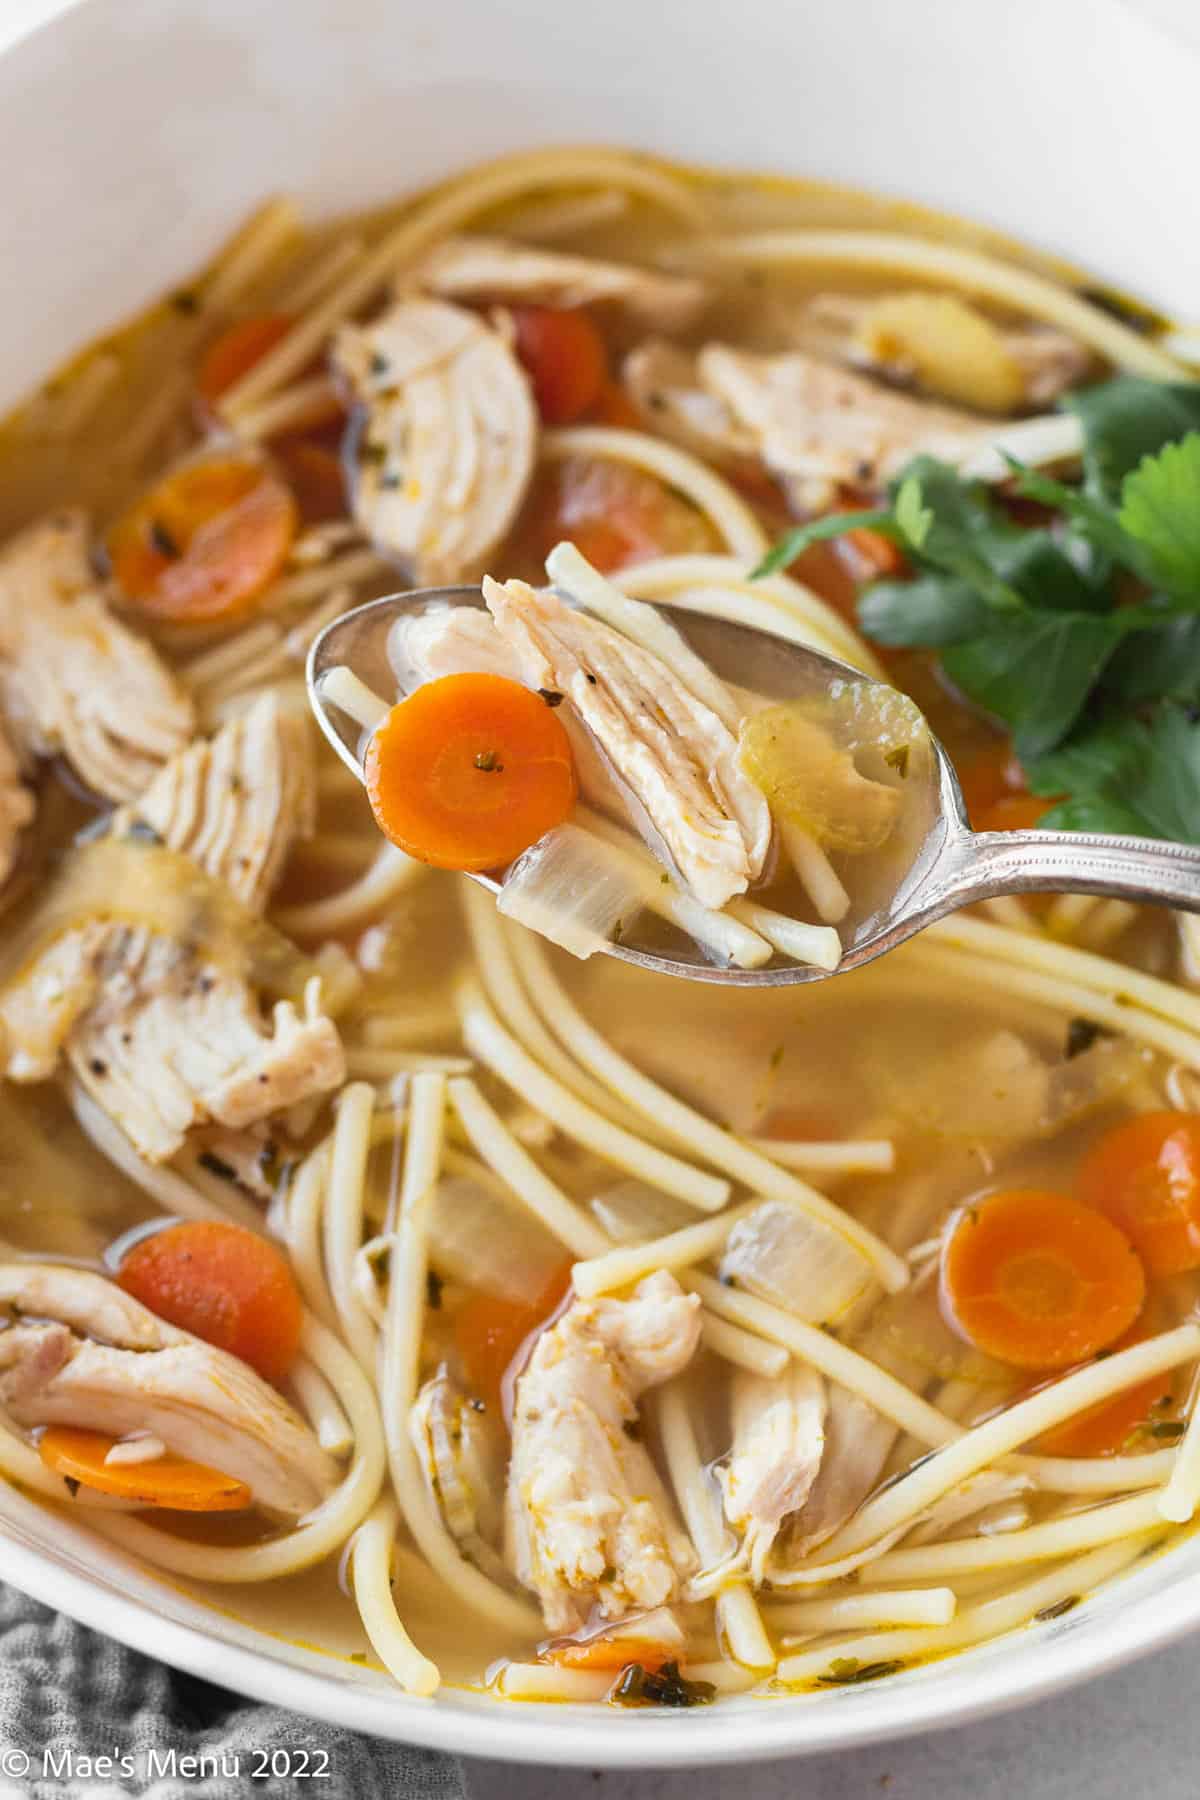 closeup shot of a spoonful of gluten free chicken noodle soup showing a coin of carrot, pieces of celery and onion, shredded chicken breast and spaghetti noodles cut into fideos.